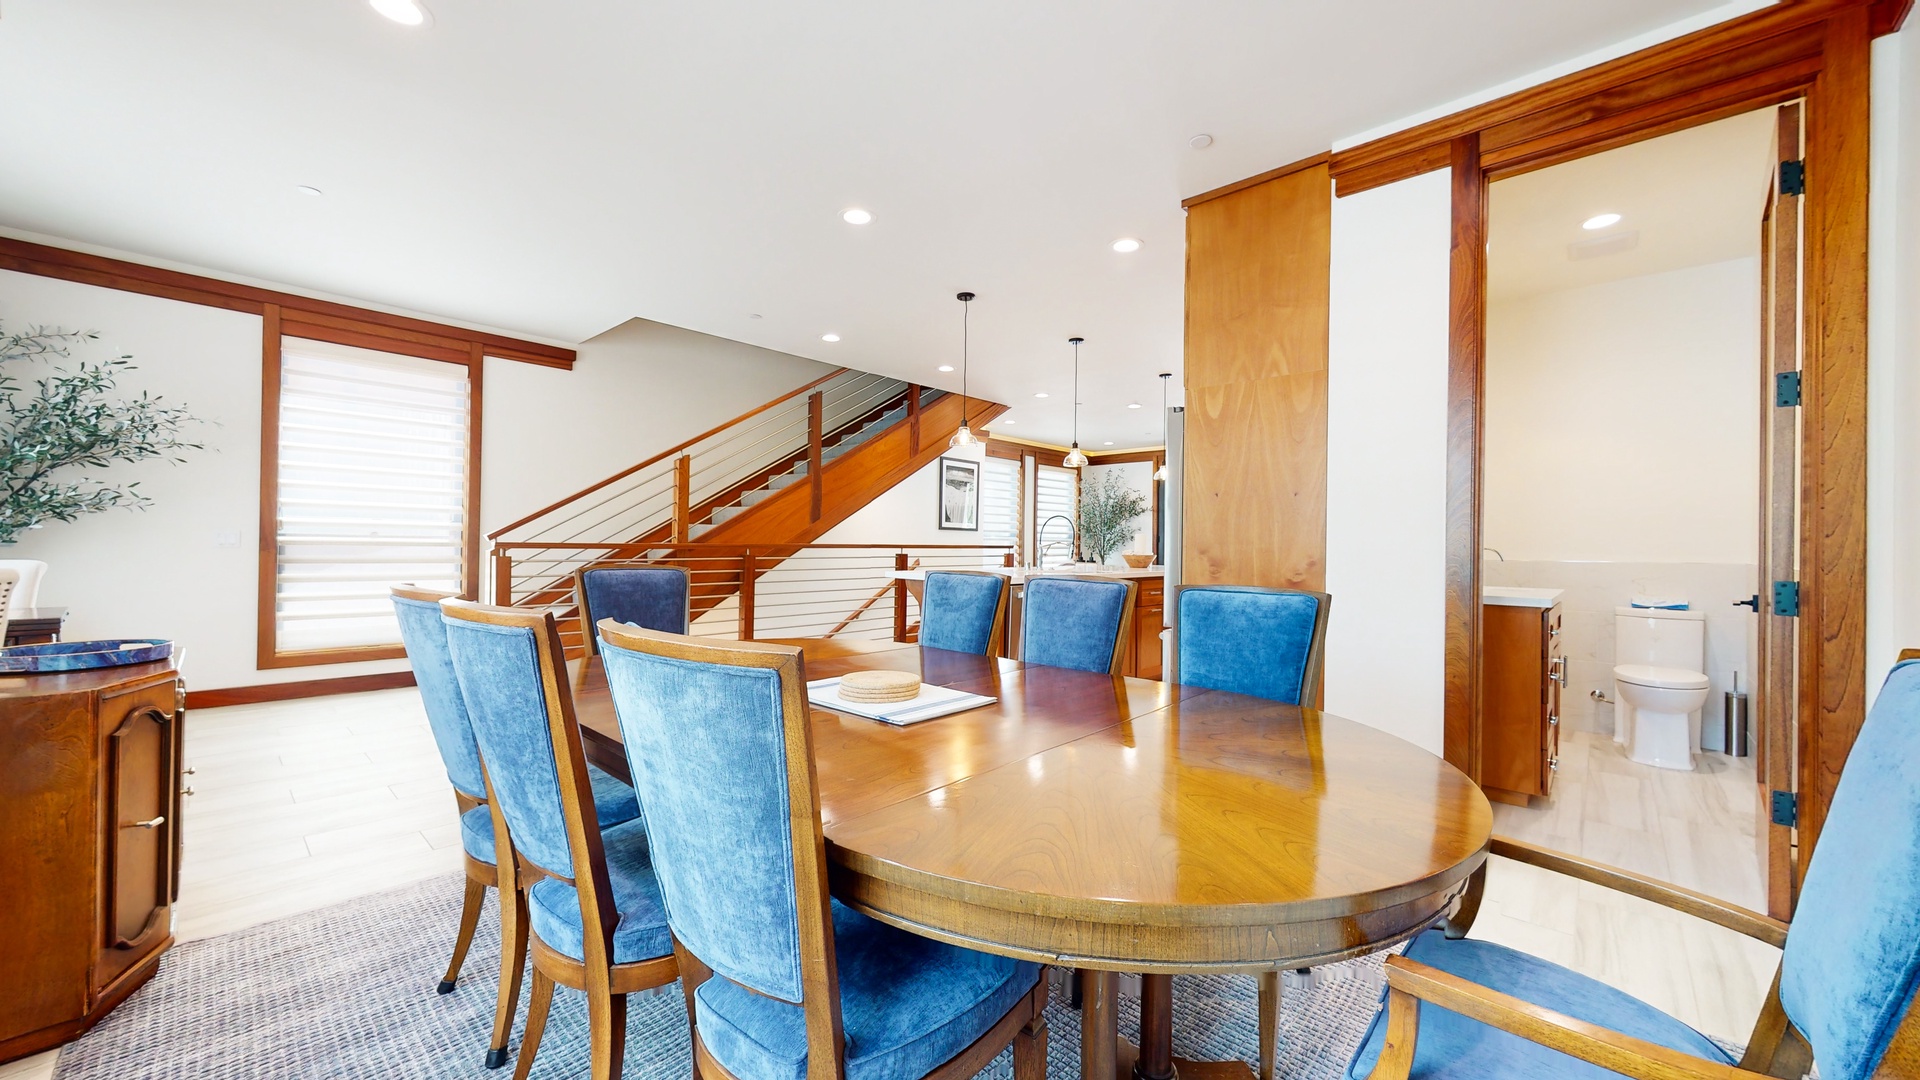 Enjoy the open flow from the kitchen to the dining room, offering seating for 8